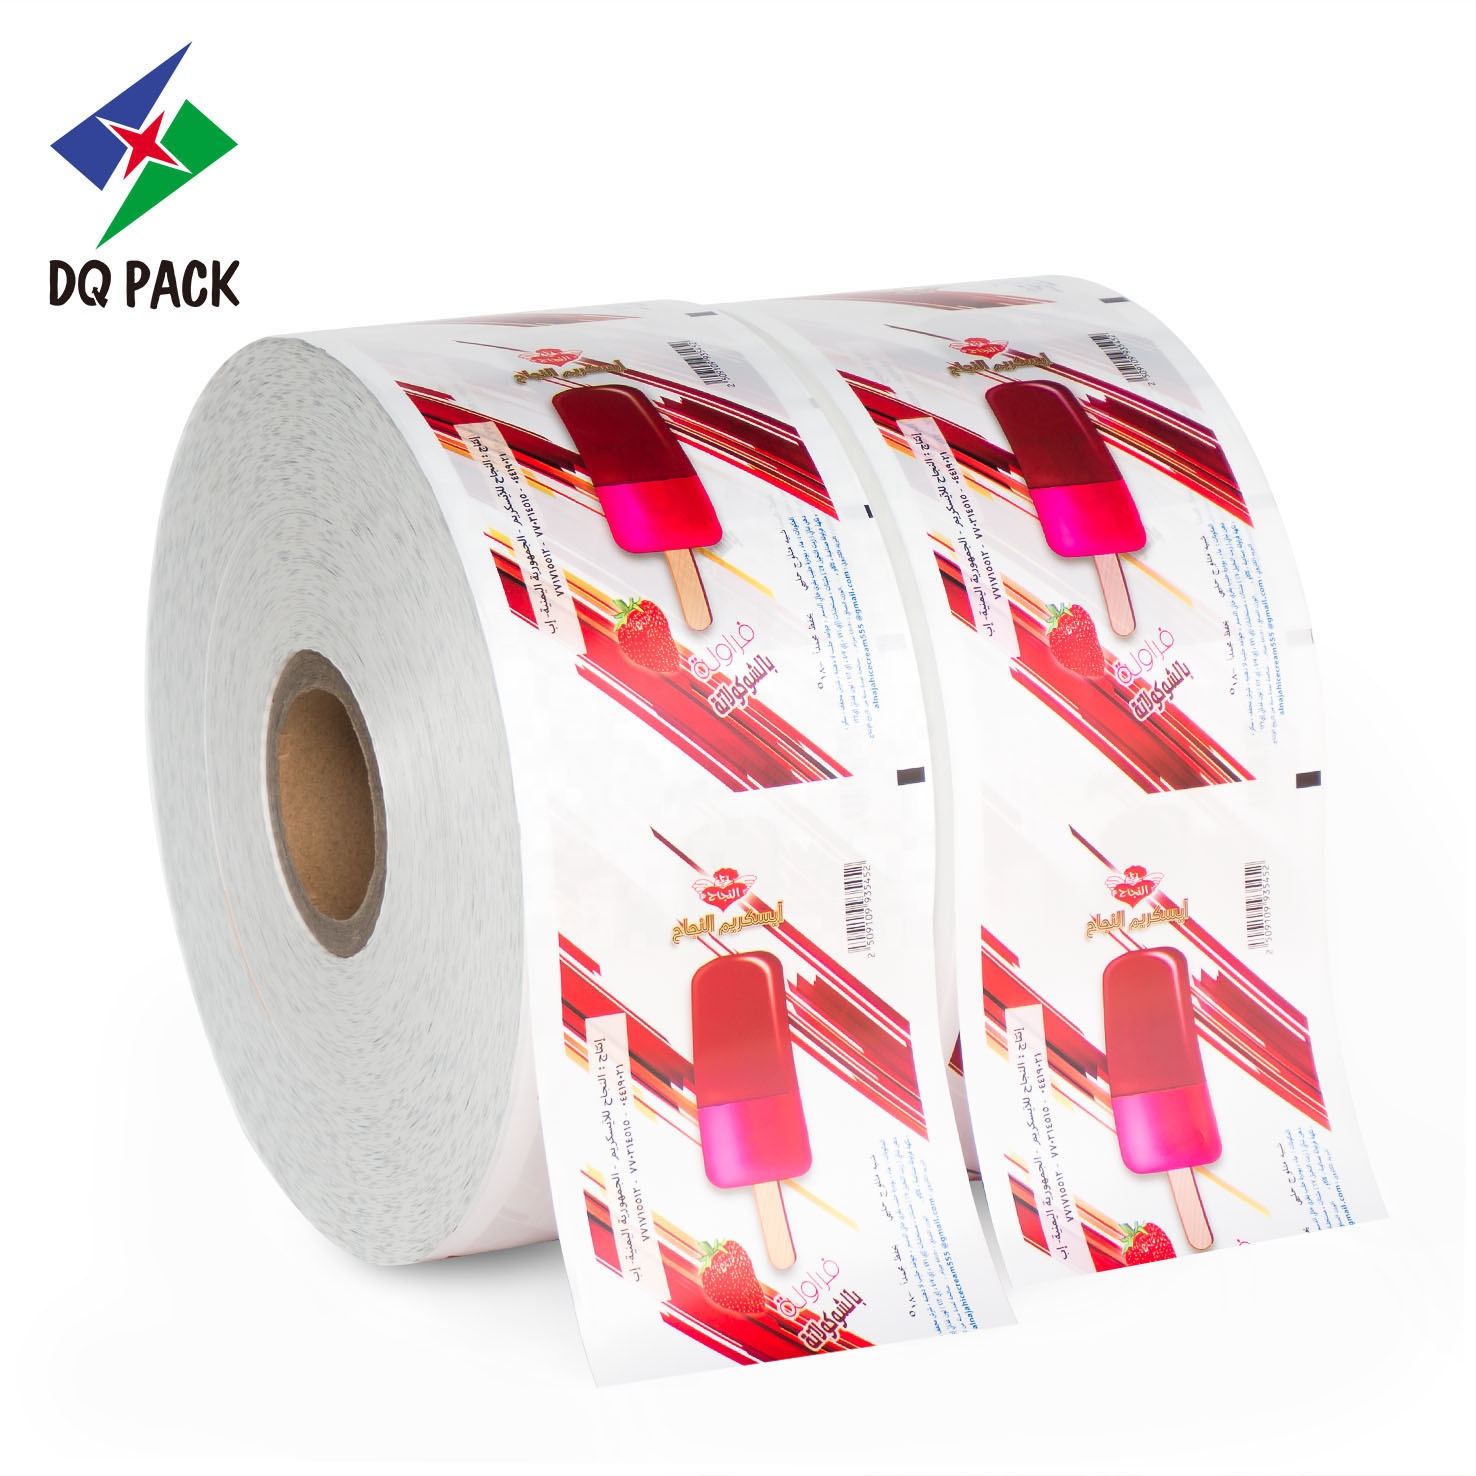 DQ PACK Customized Printed BOPP/CPP Laminating Aluminized Film Roll Ice Cream Popsicle Packaging Plastic Film